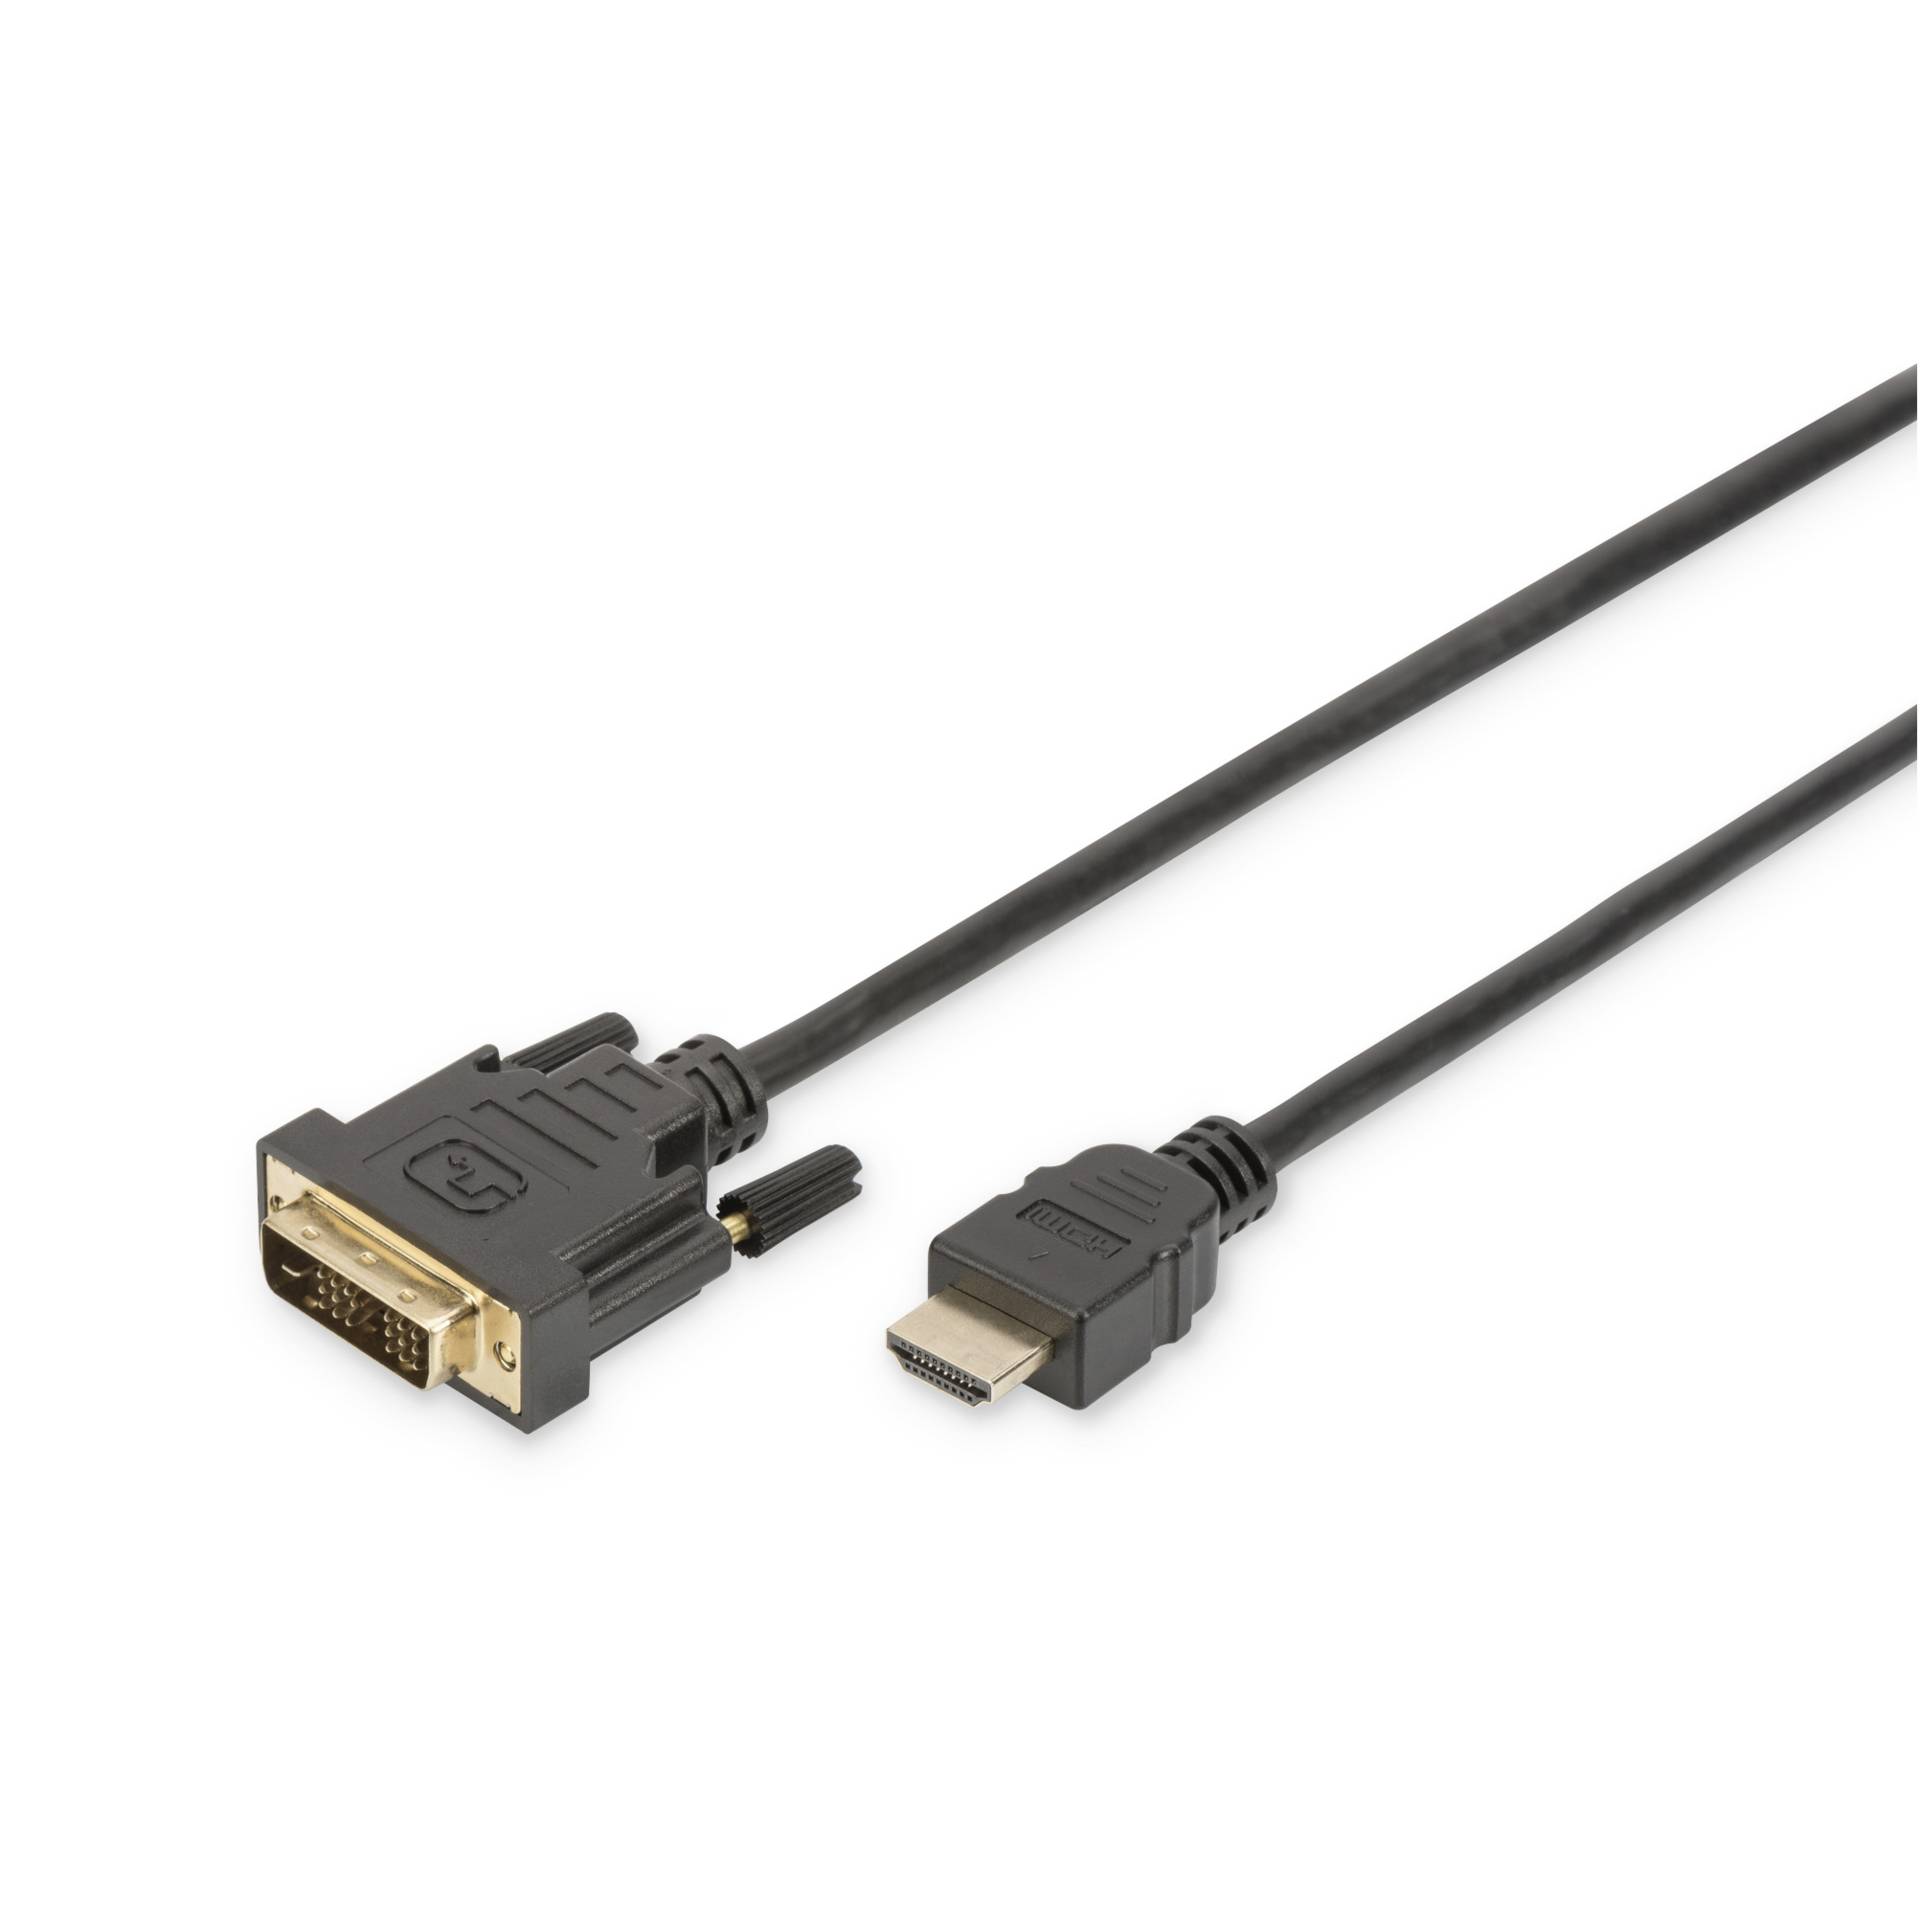 DIGITUS HDMI adapter cable TTyp A-DVI(18+1) 2m